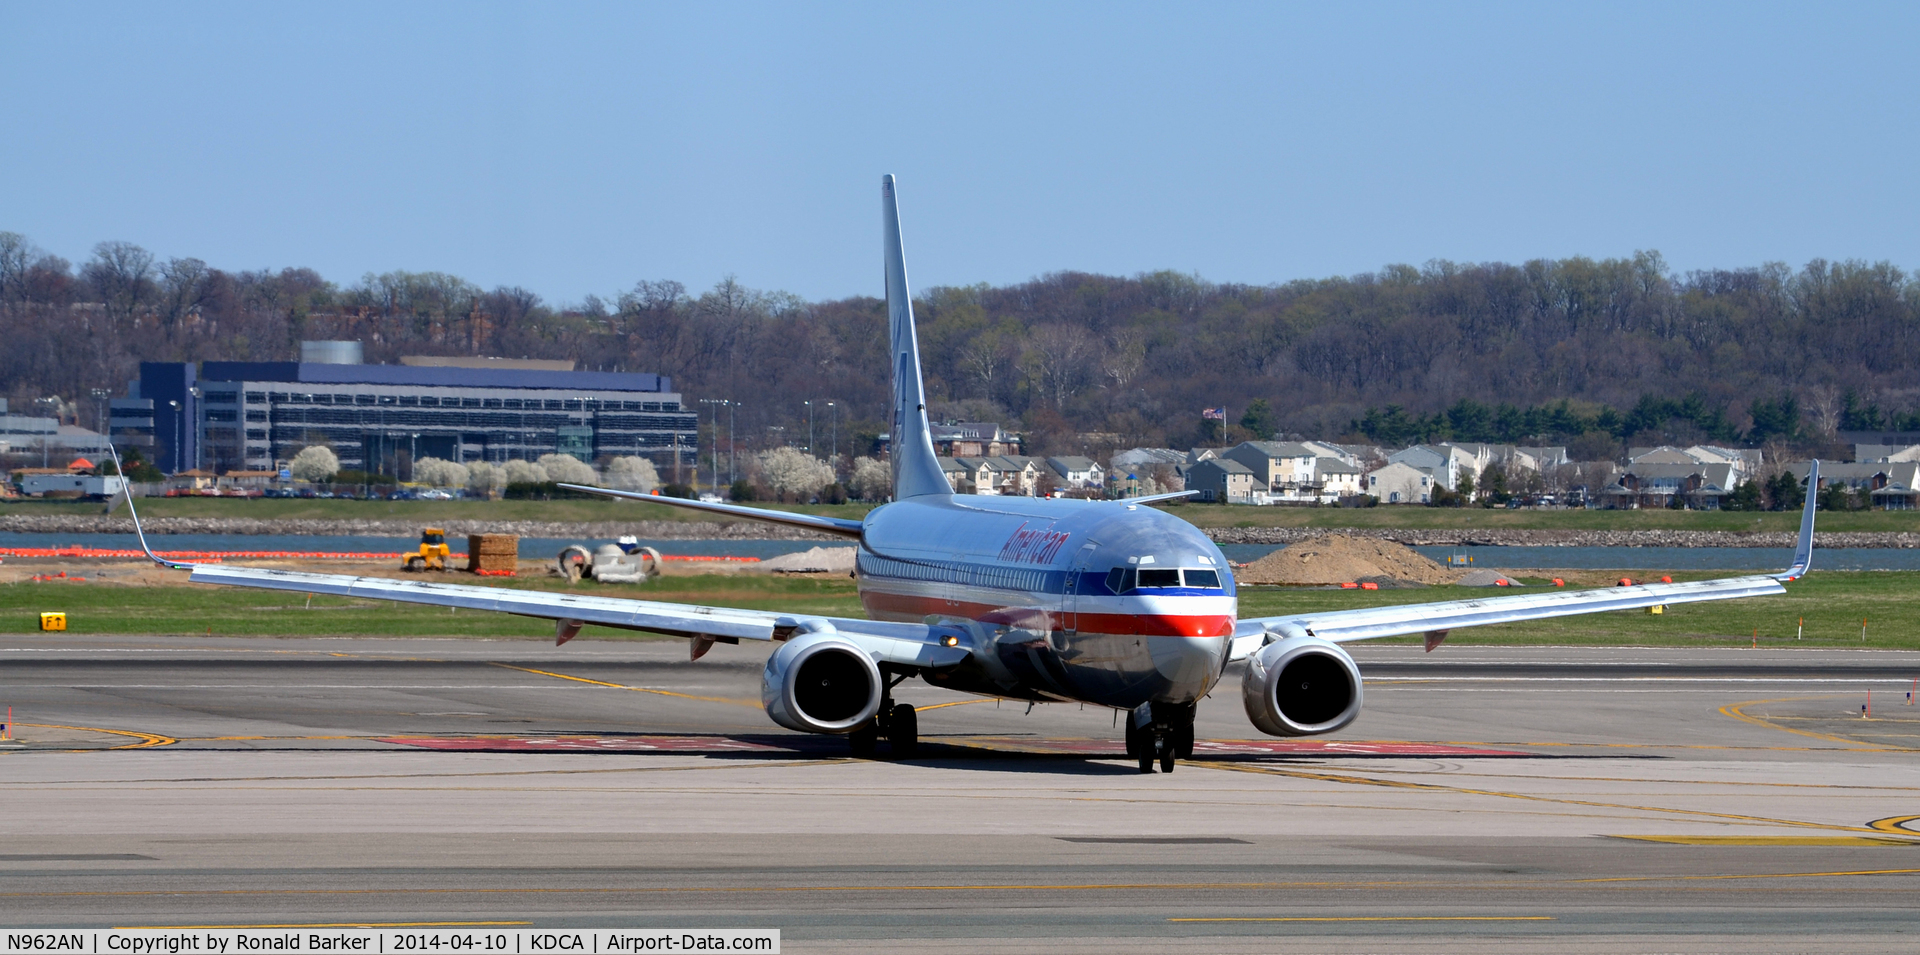 N962AN, 2001 Boeing 737-823 C/N 30858, Taxi off the runway National